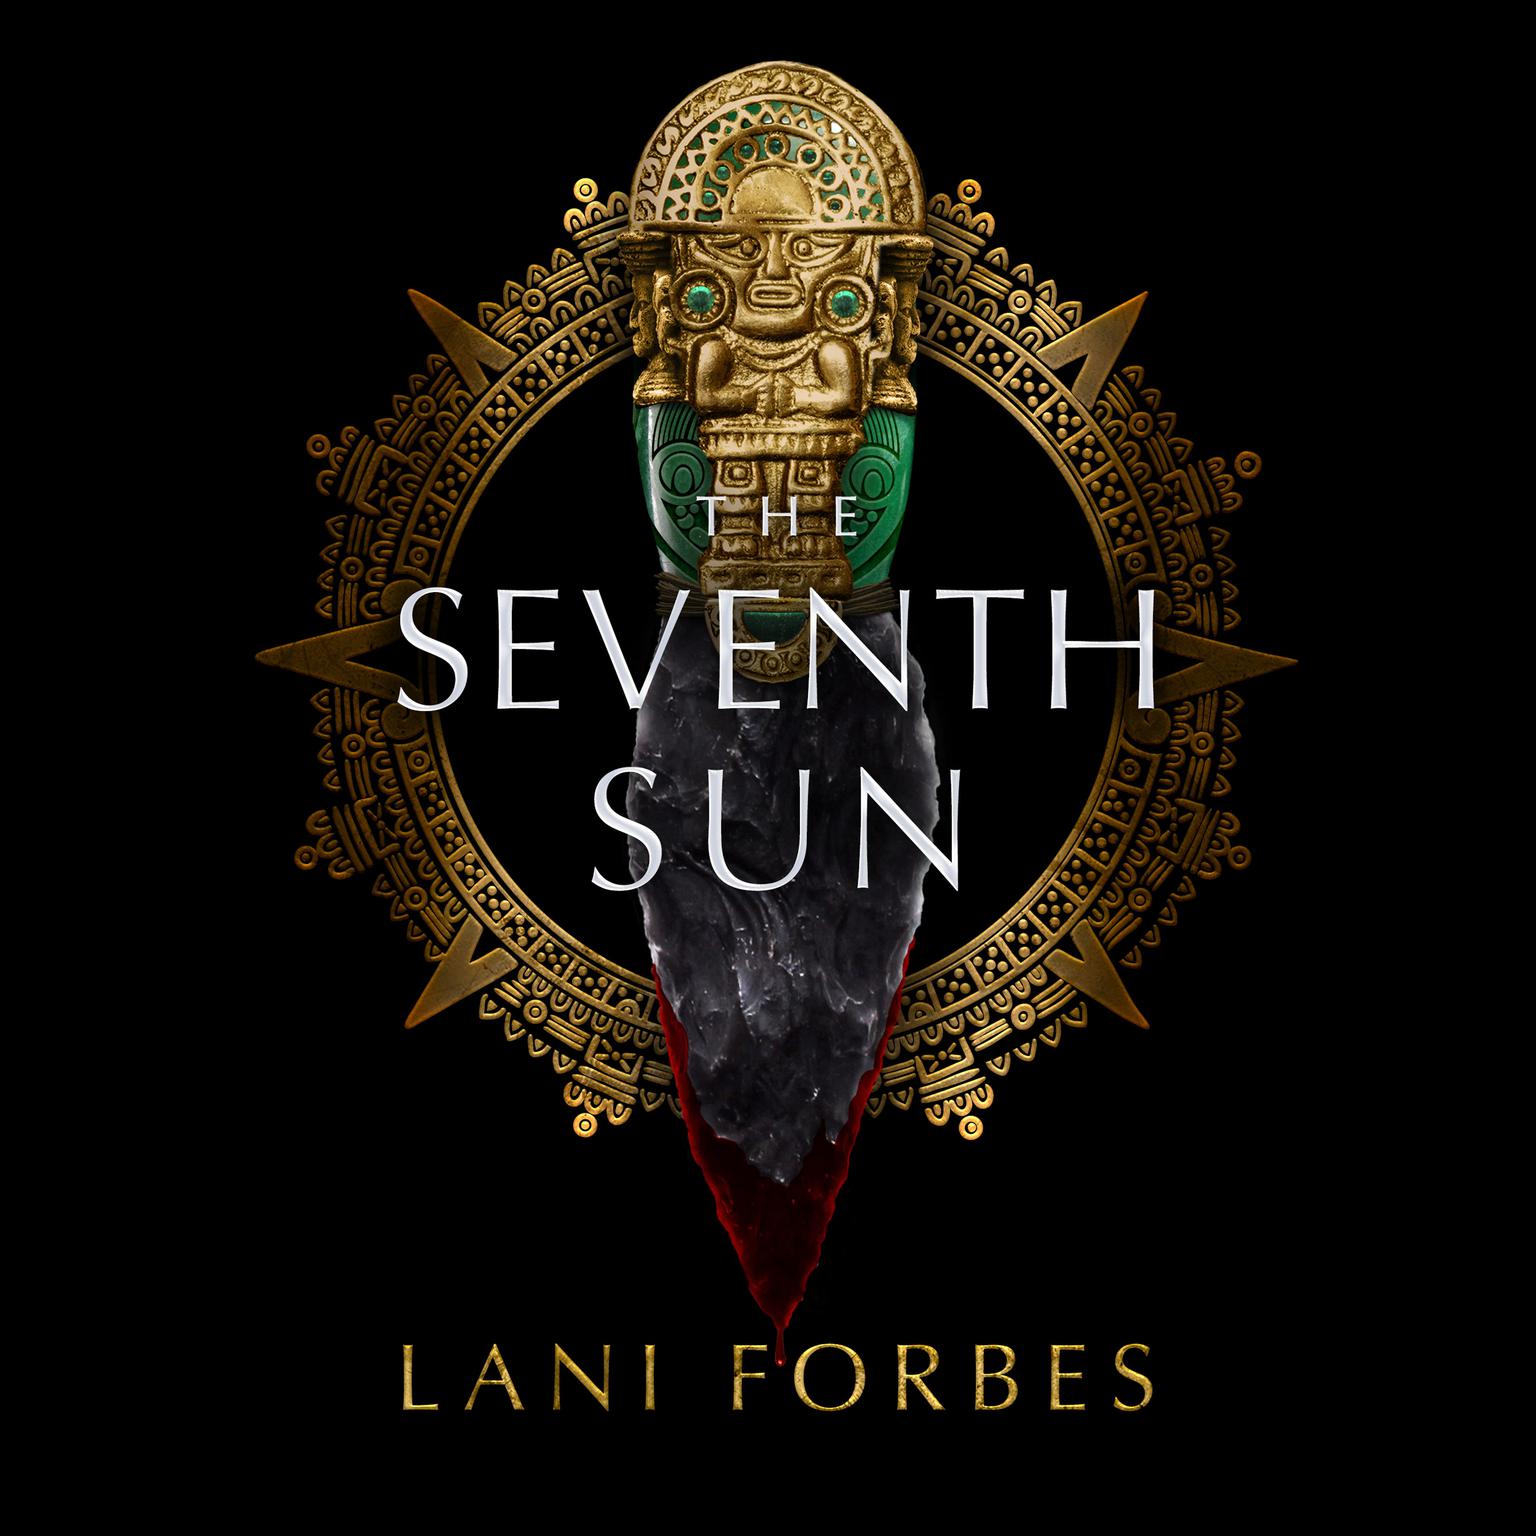 The Seventh Sun Audiobook, by Lani Forbes